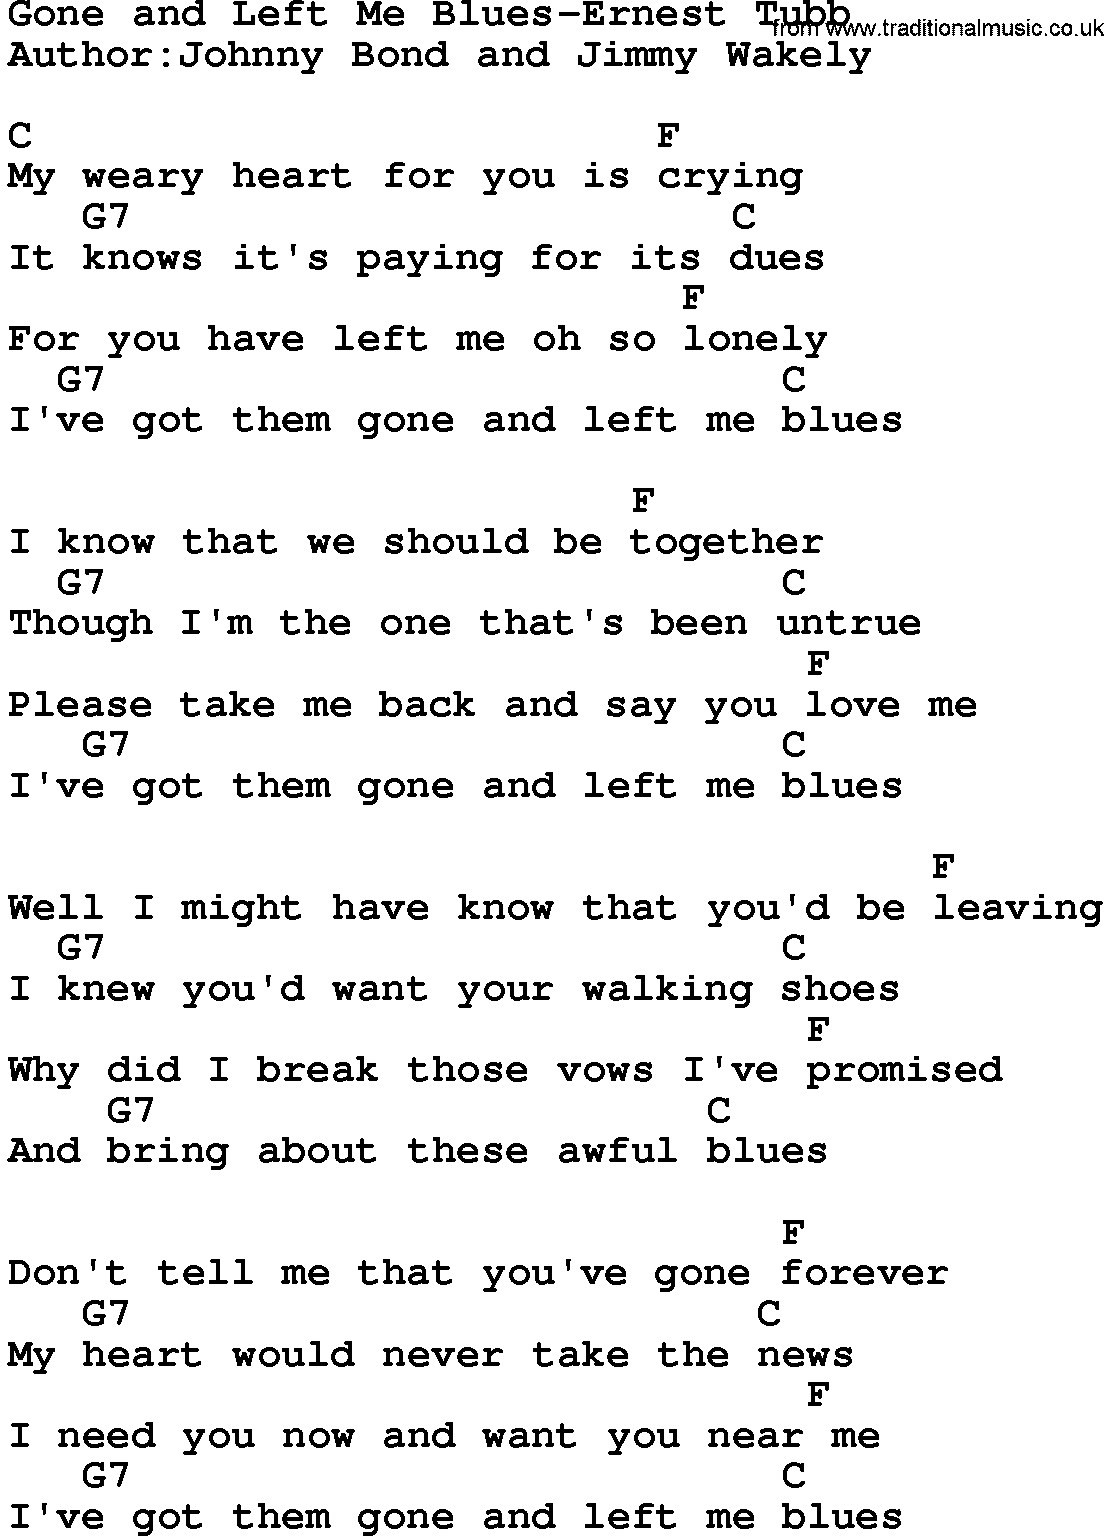 Country music song: Gone And Left Me Blues-Ernest Tubb lyrics and chords